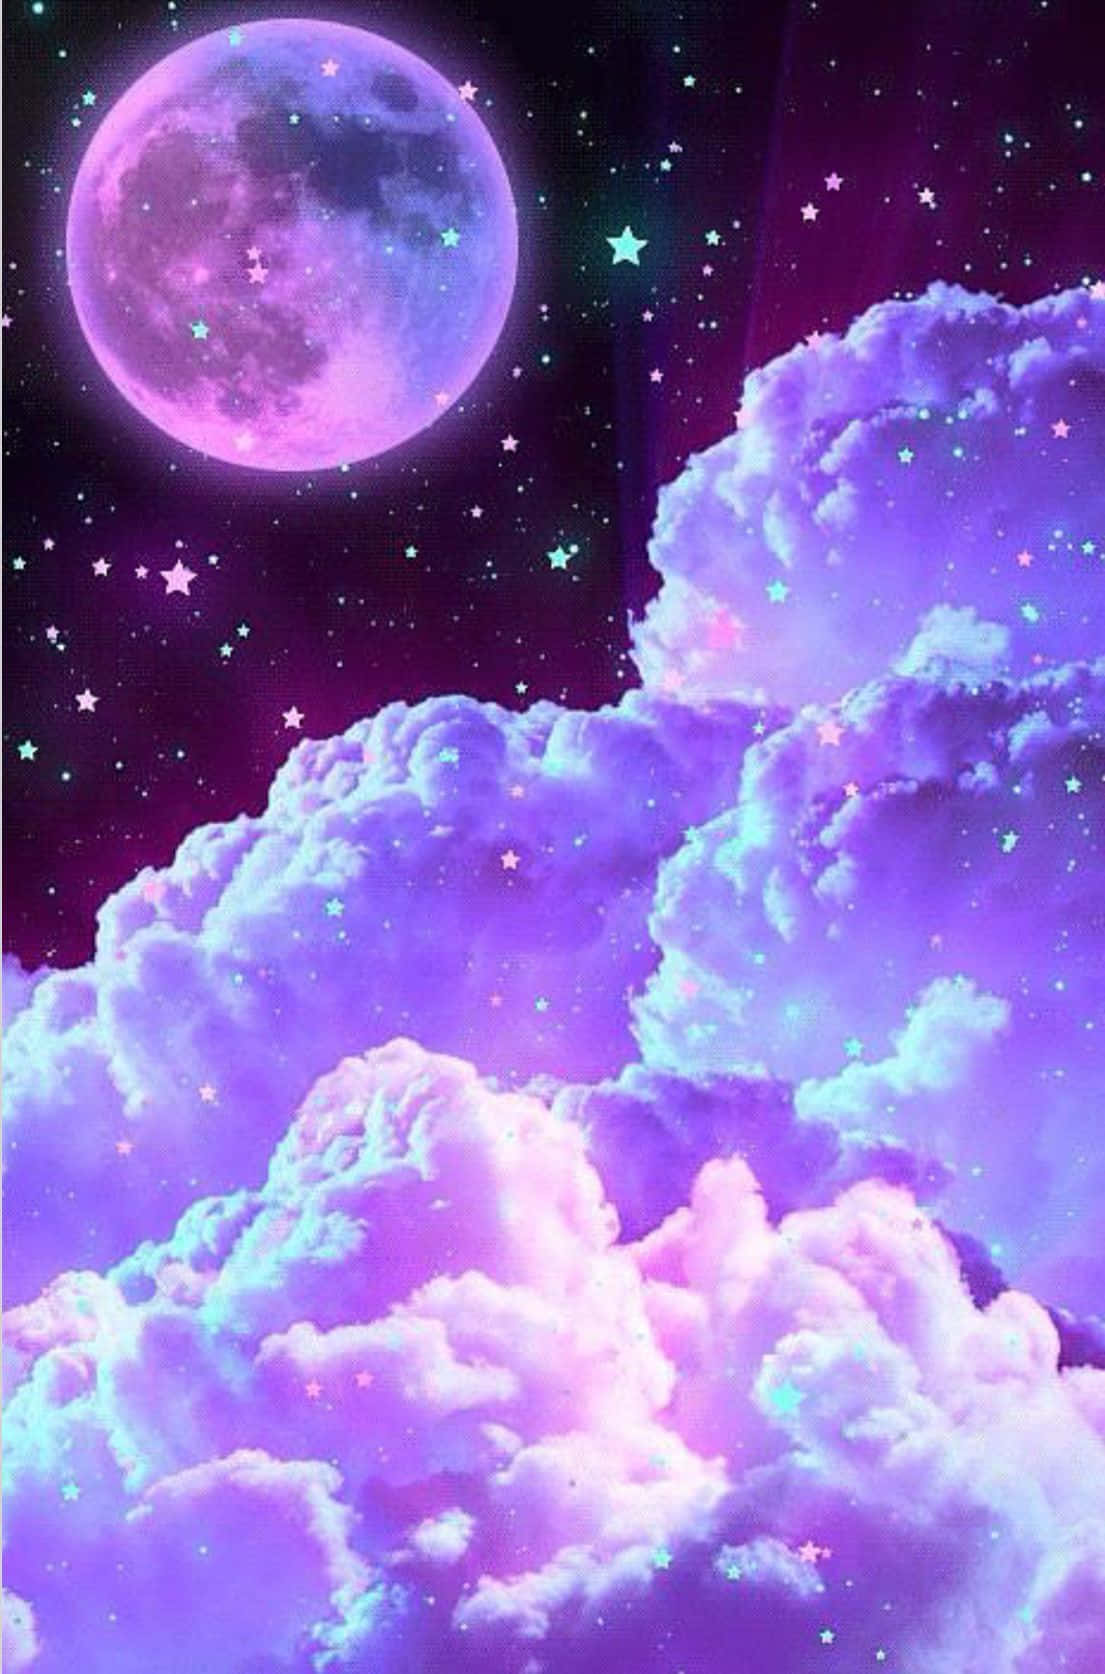 Free download Download A Dreamy Colorful Nebula In an Enchanting Kawaii Galaxy [1105x1674] for your Desktop, Mobile & Tablet. Explore Aesthetic Galaxy Wallpaper. Galaxy Wallpaper, Aesthetic Wallpaper, Aesthetic Wallpaper Space